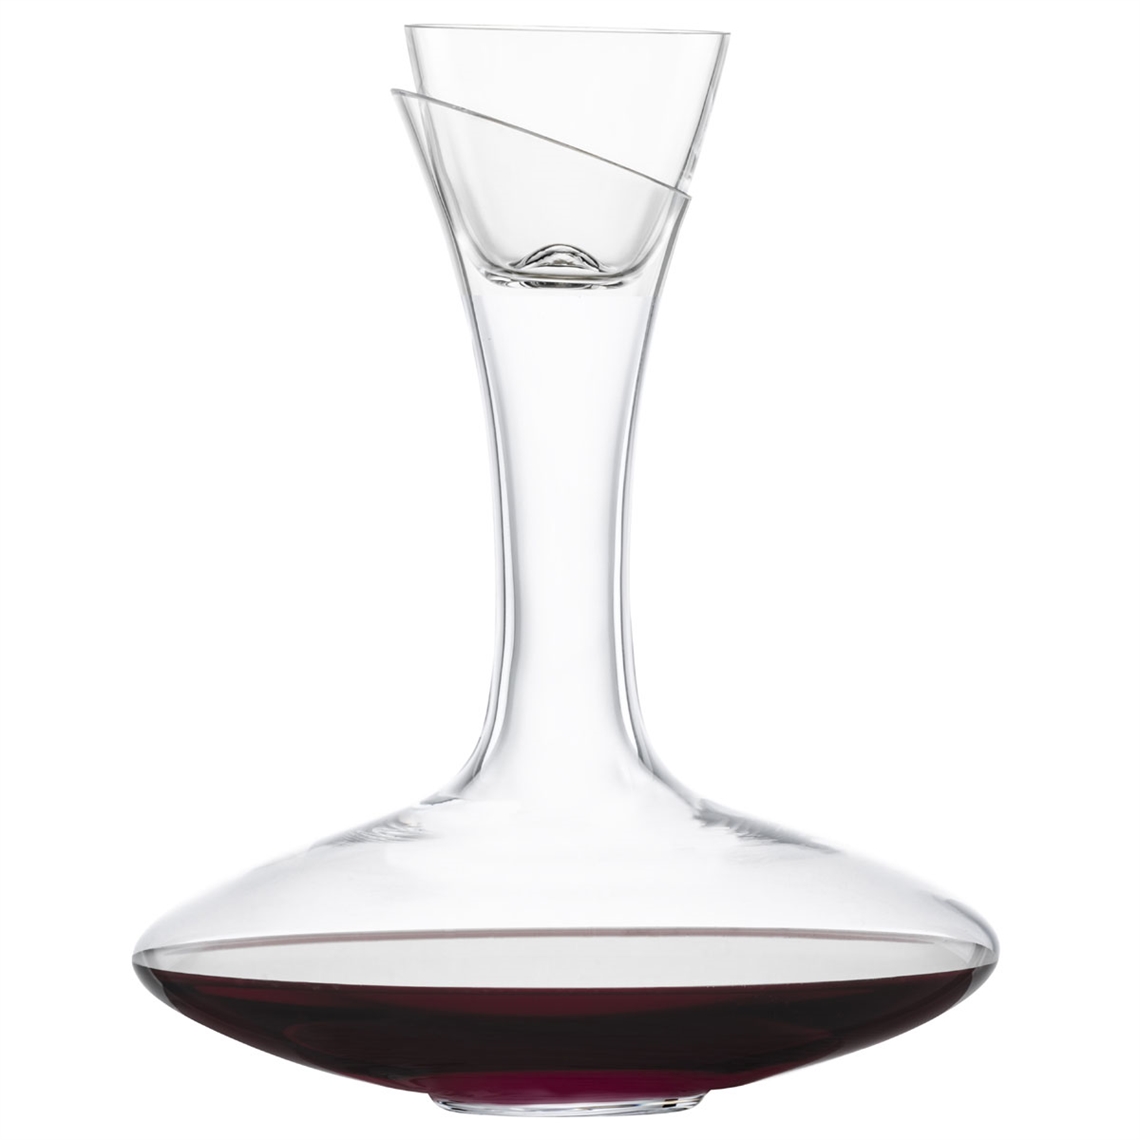 Eisch Glas Crystal Chateau Wine Decanter 1.5L + Top